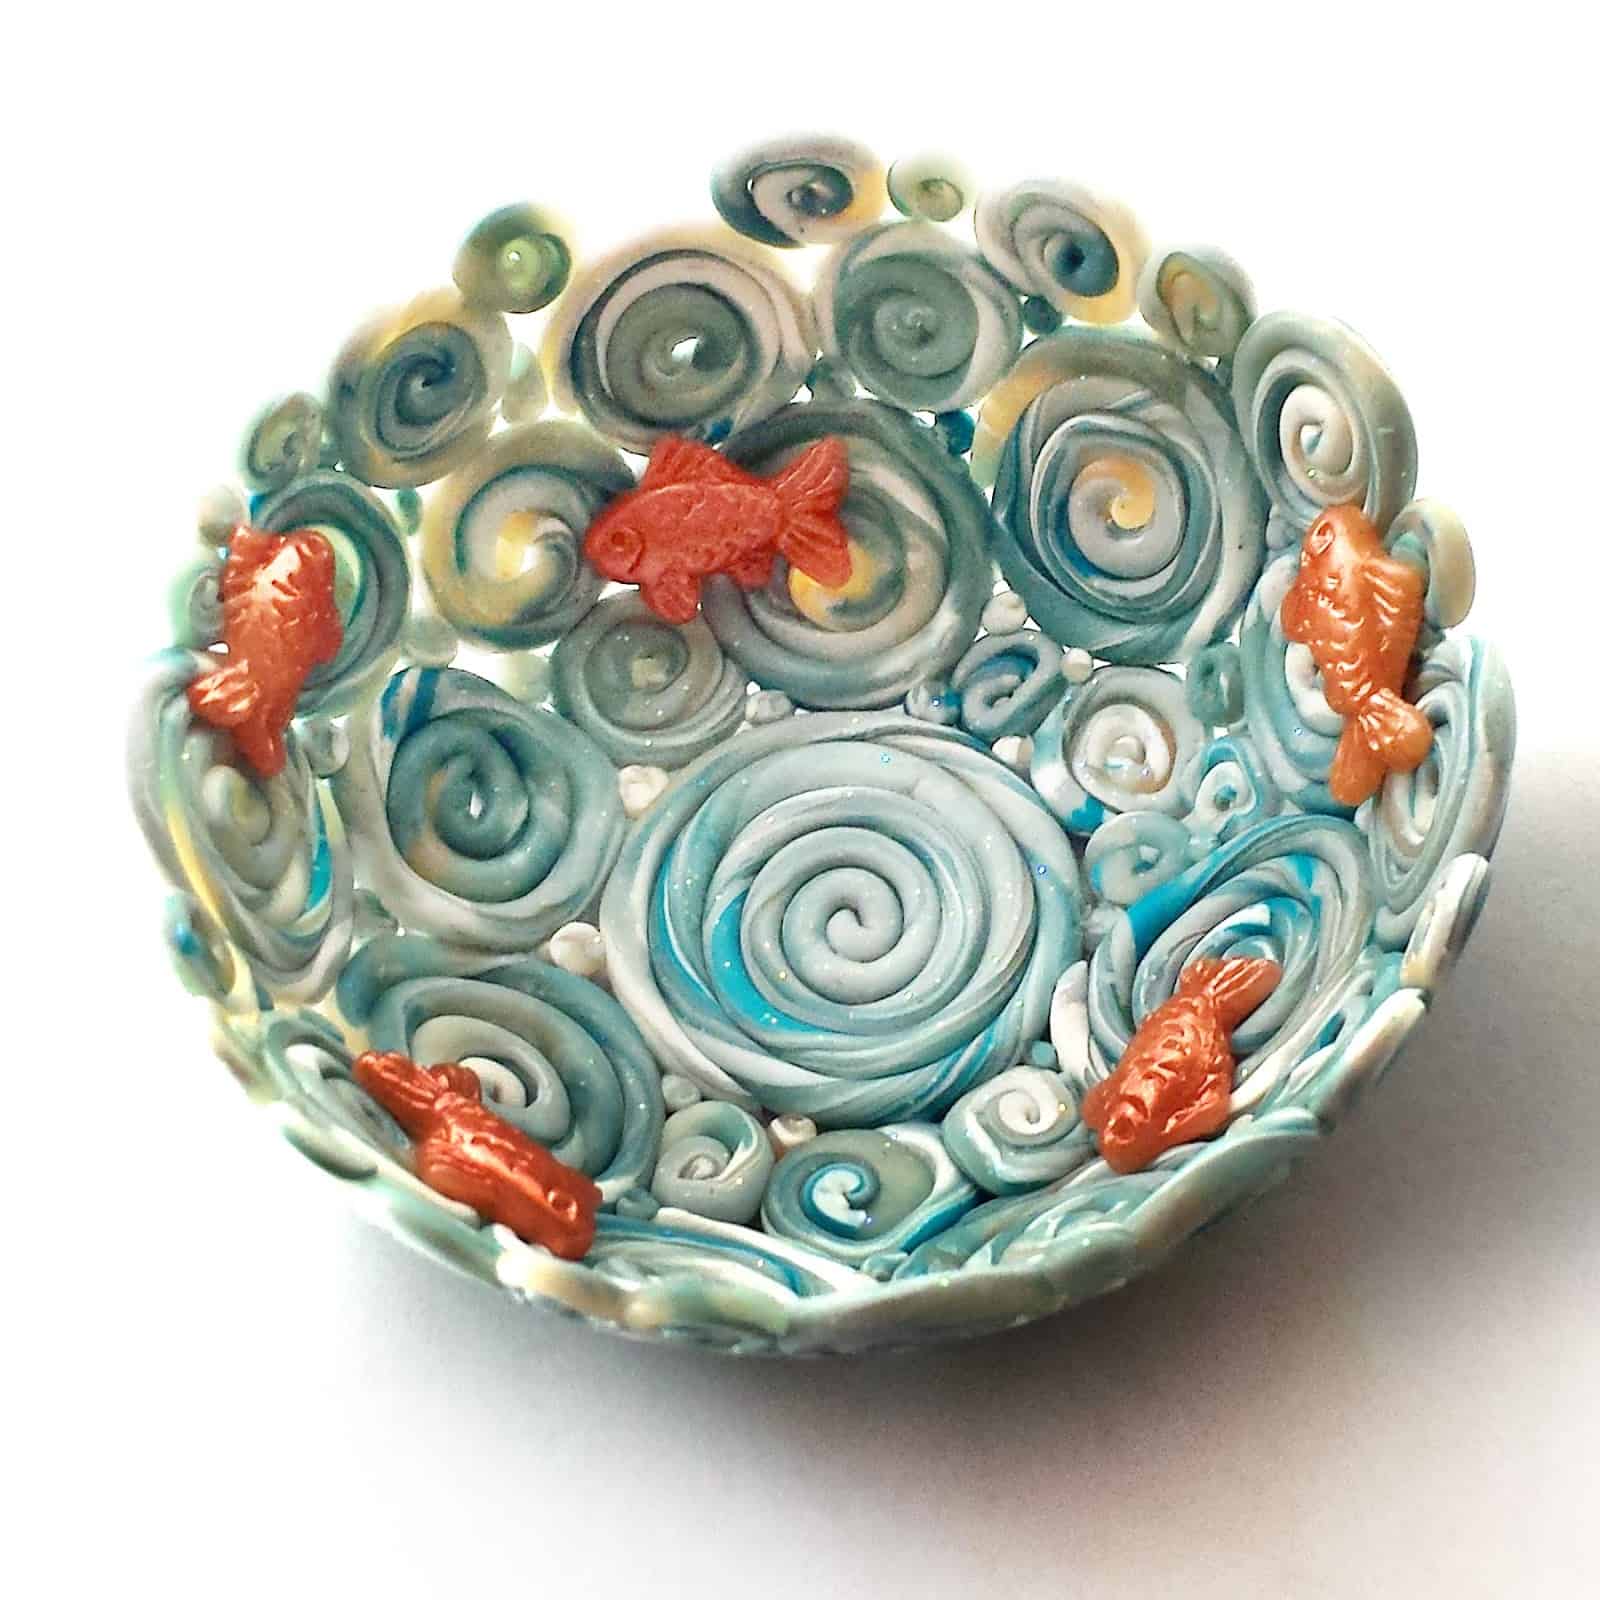 Coiled clay bowl